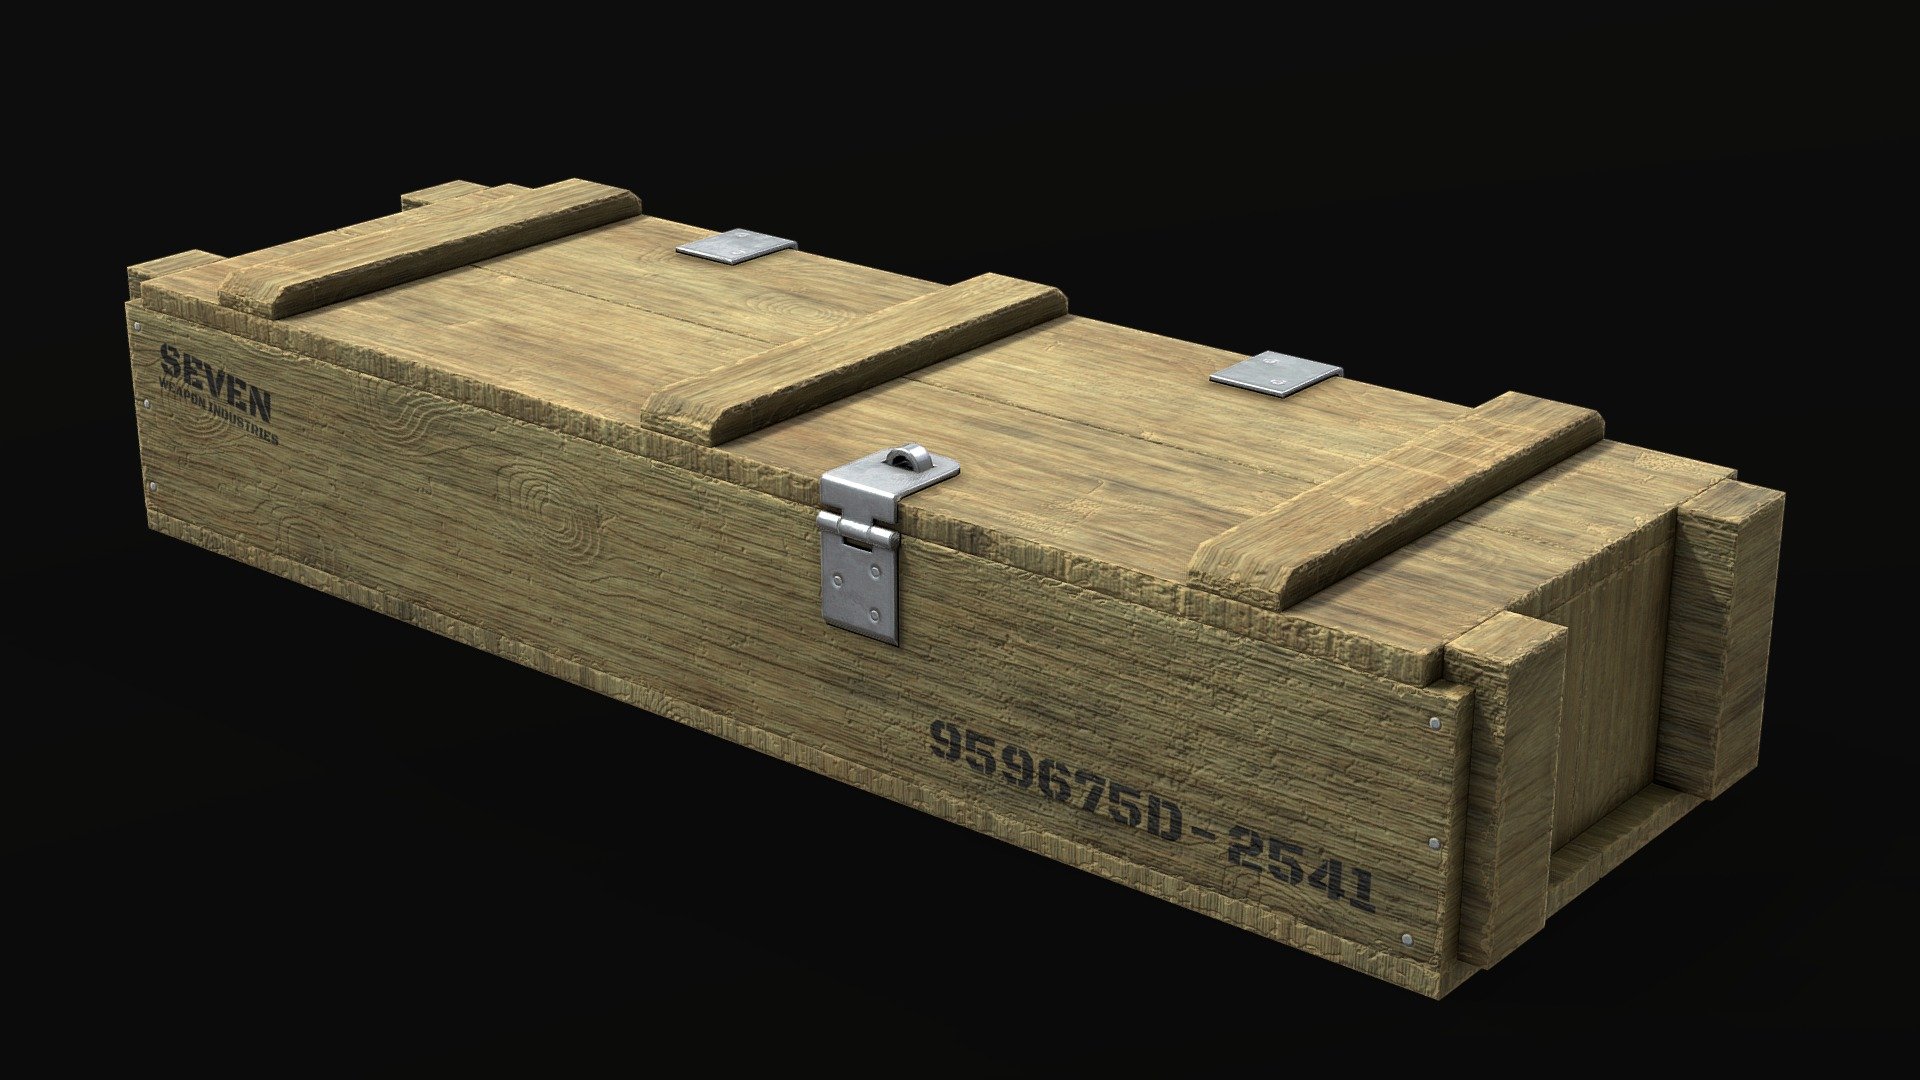 Gun crate model, I made it for a few renders

Modeled in blender 2.93
Textured in Substance Painter - Gun Crate - Download Free 3D model by SeveN (@SeveN-Models) 3d model